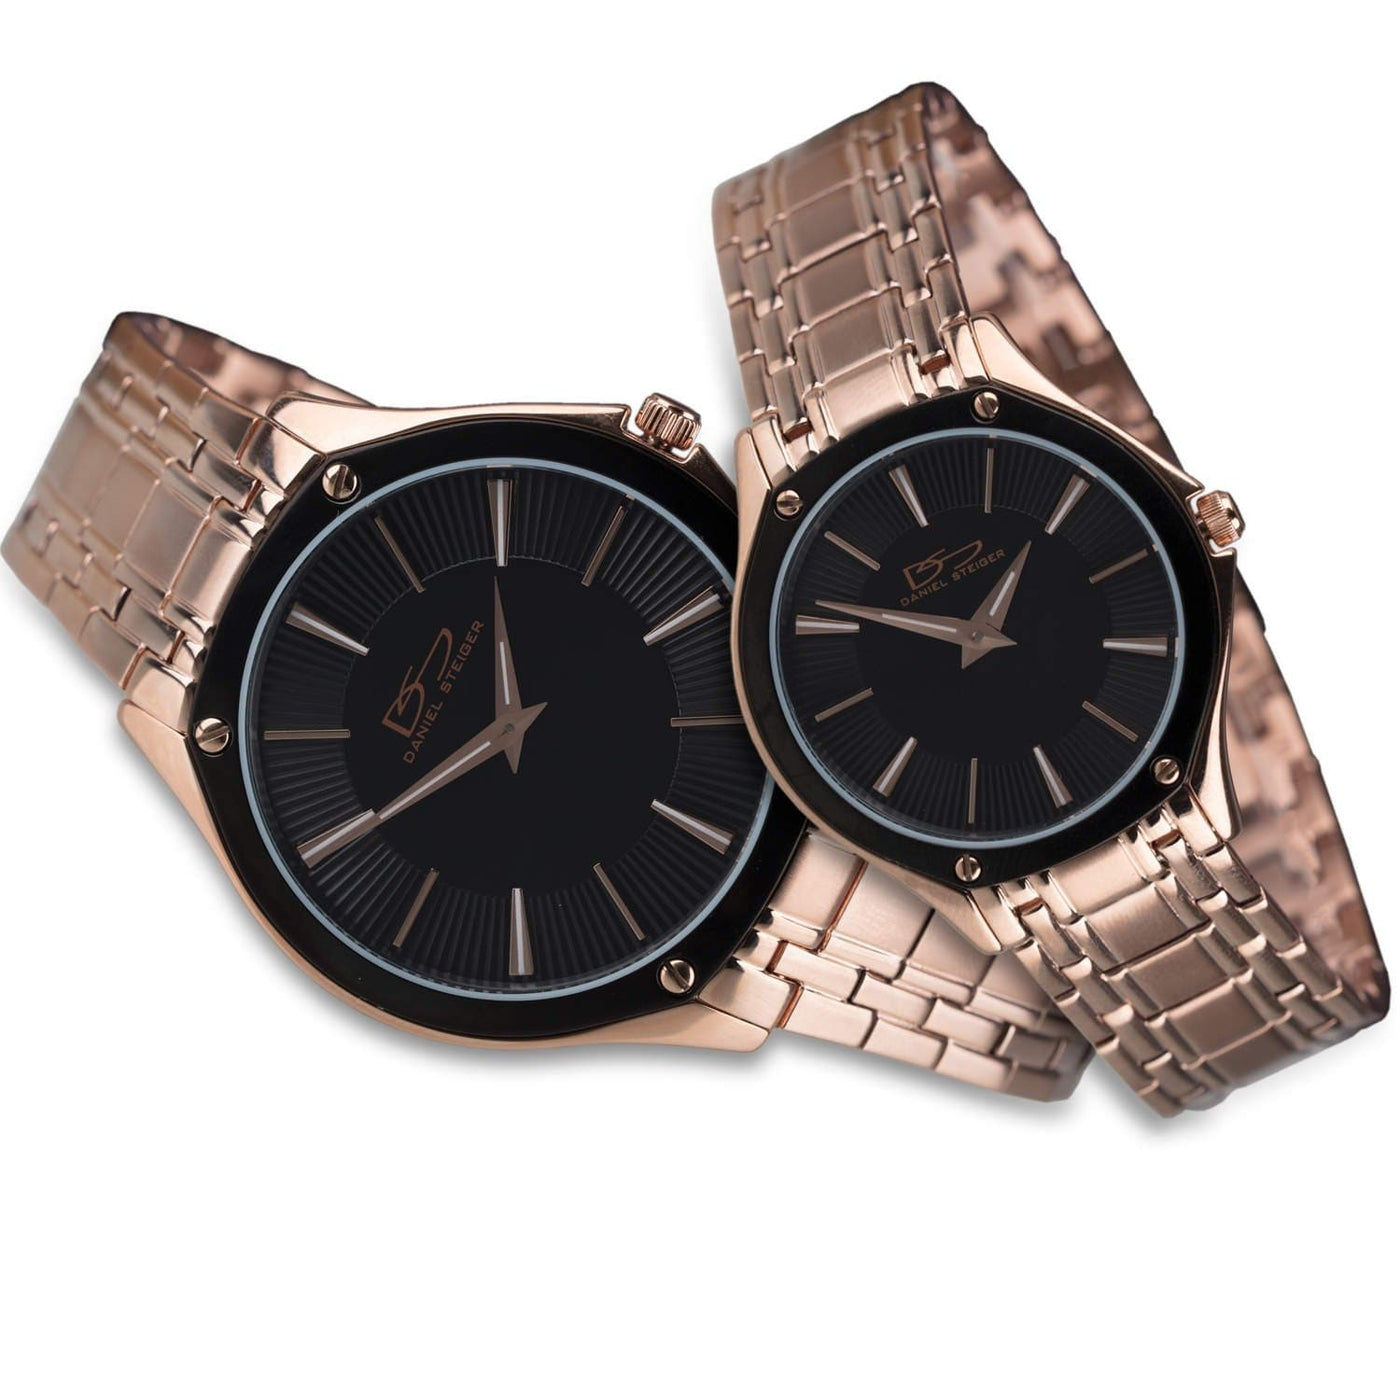 Daniel Steiger Belize Watches - Pick Any 2